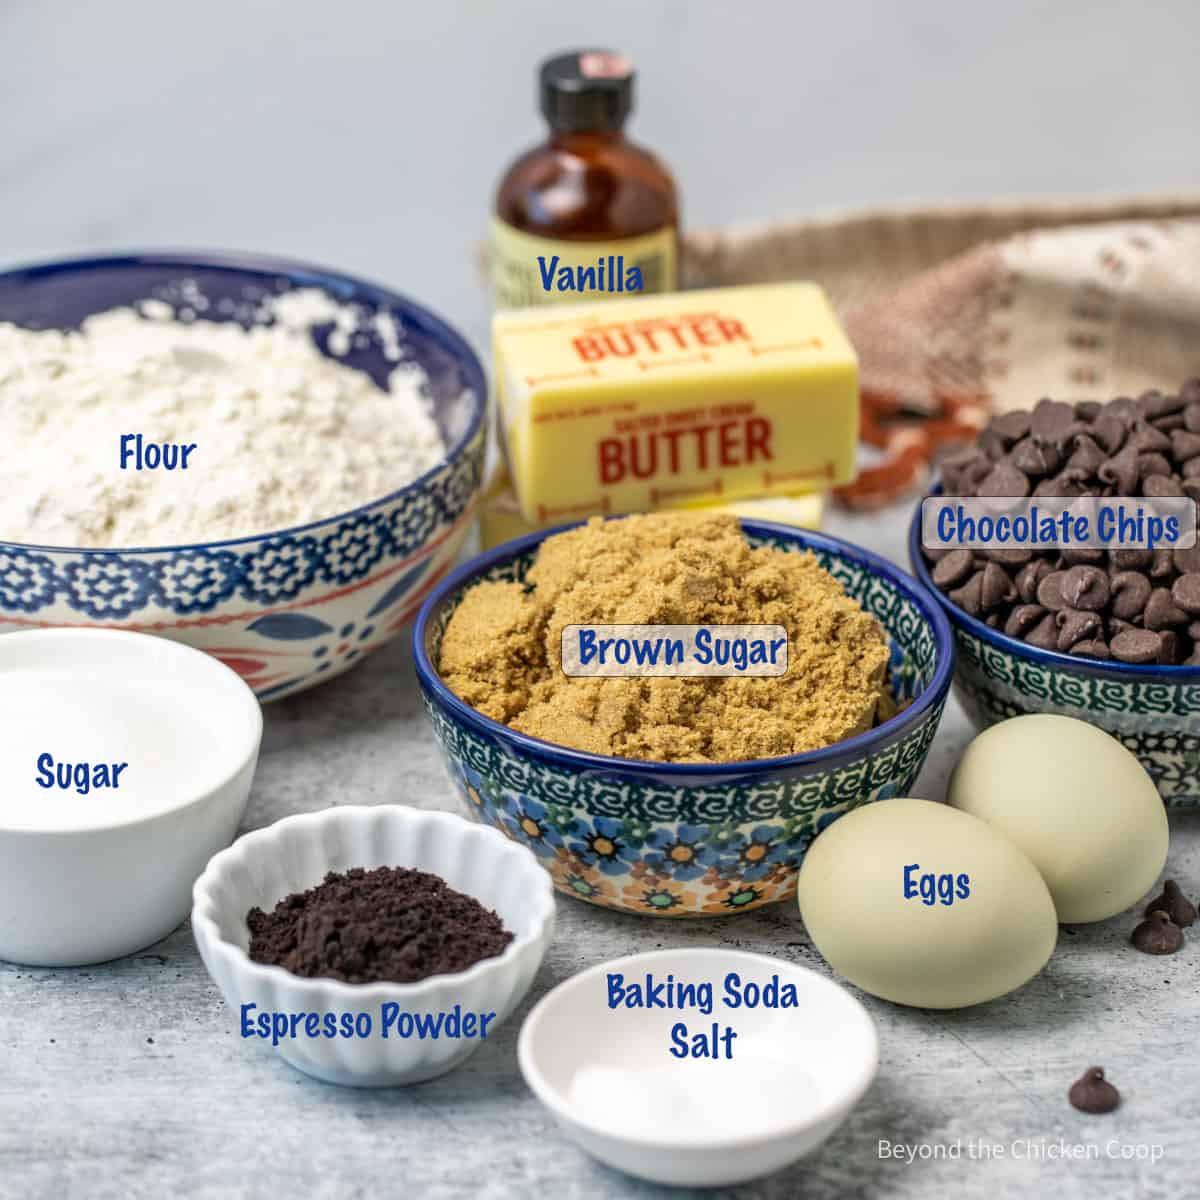 Ingredients for making chocolate chip cookies.